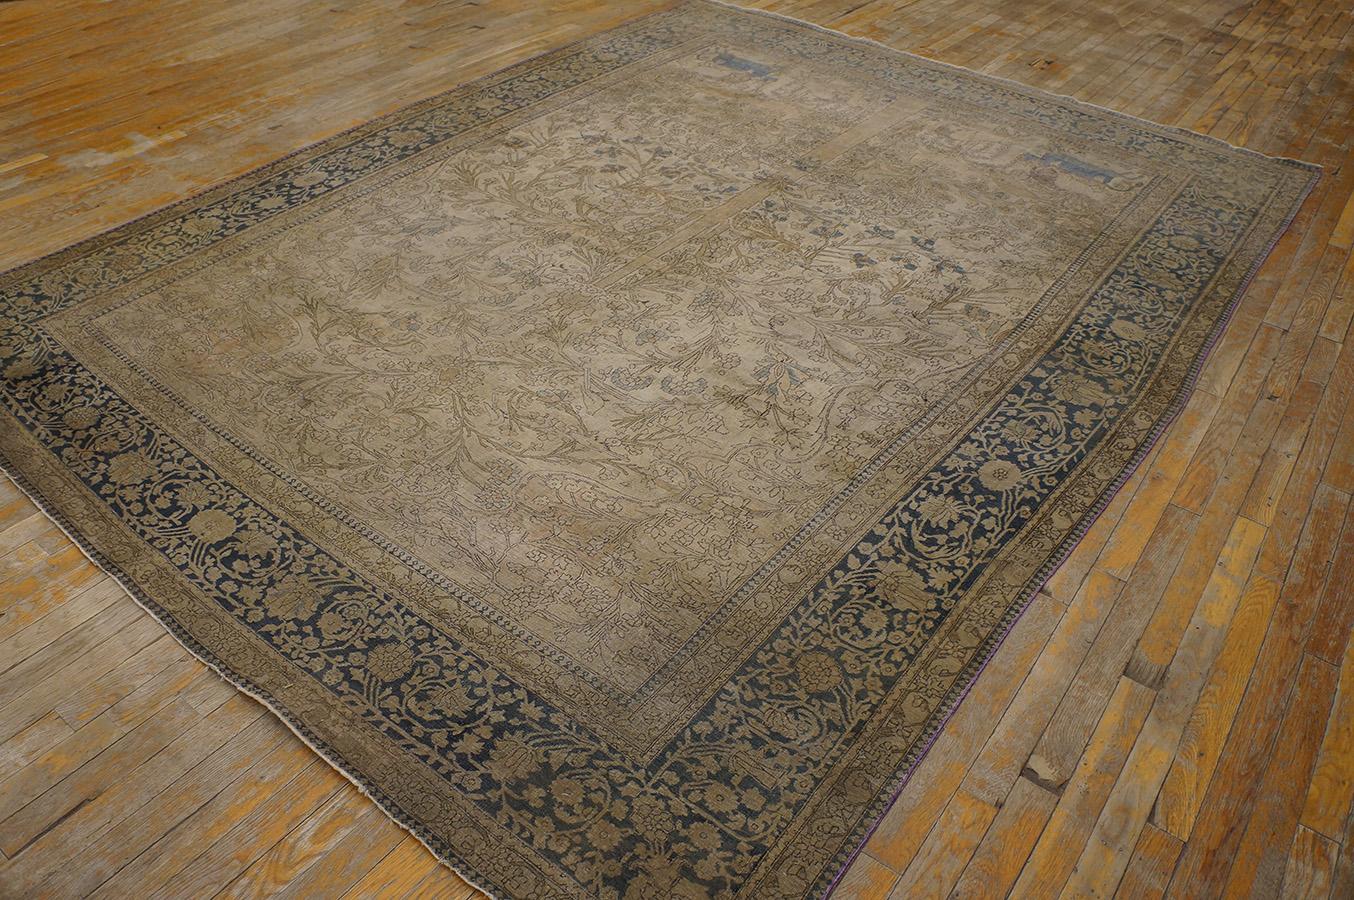 Hand-Knotted 19th Century Persian Mohtasham Kashan Carpet ( 7' 7'' x 10' 3'' - 232 x 313 cm ) For Sale